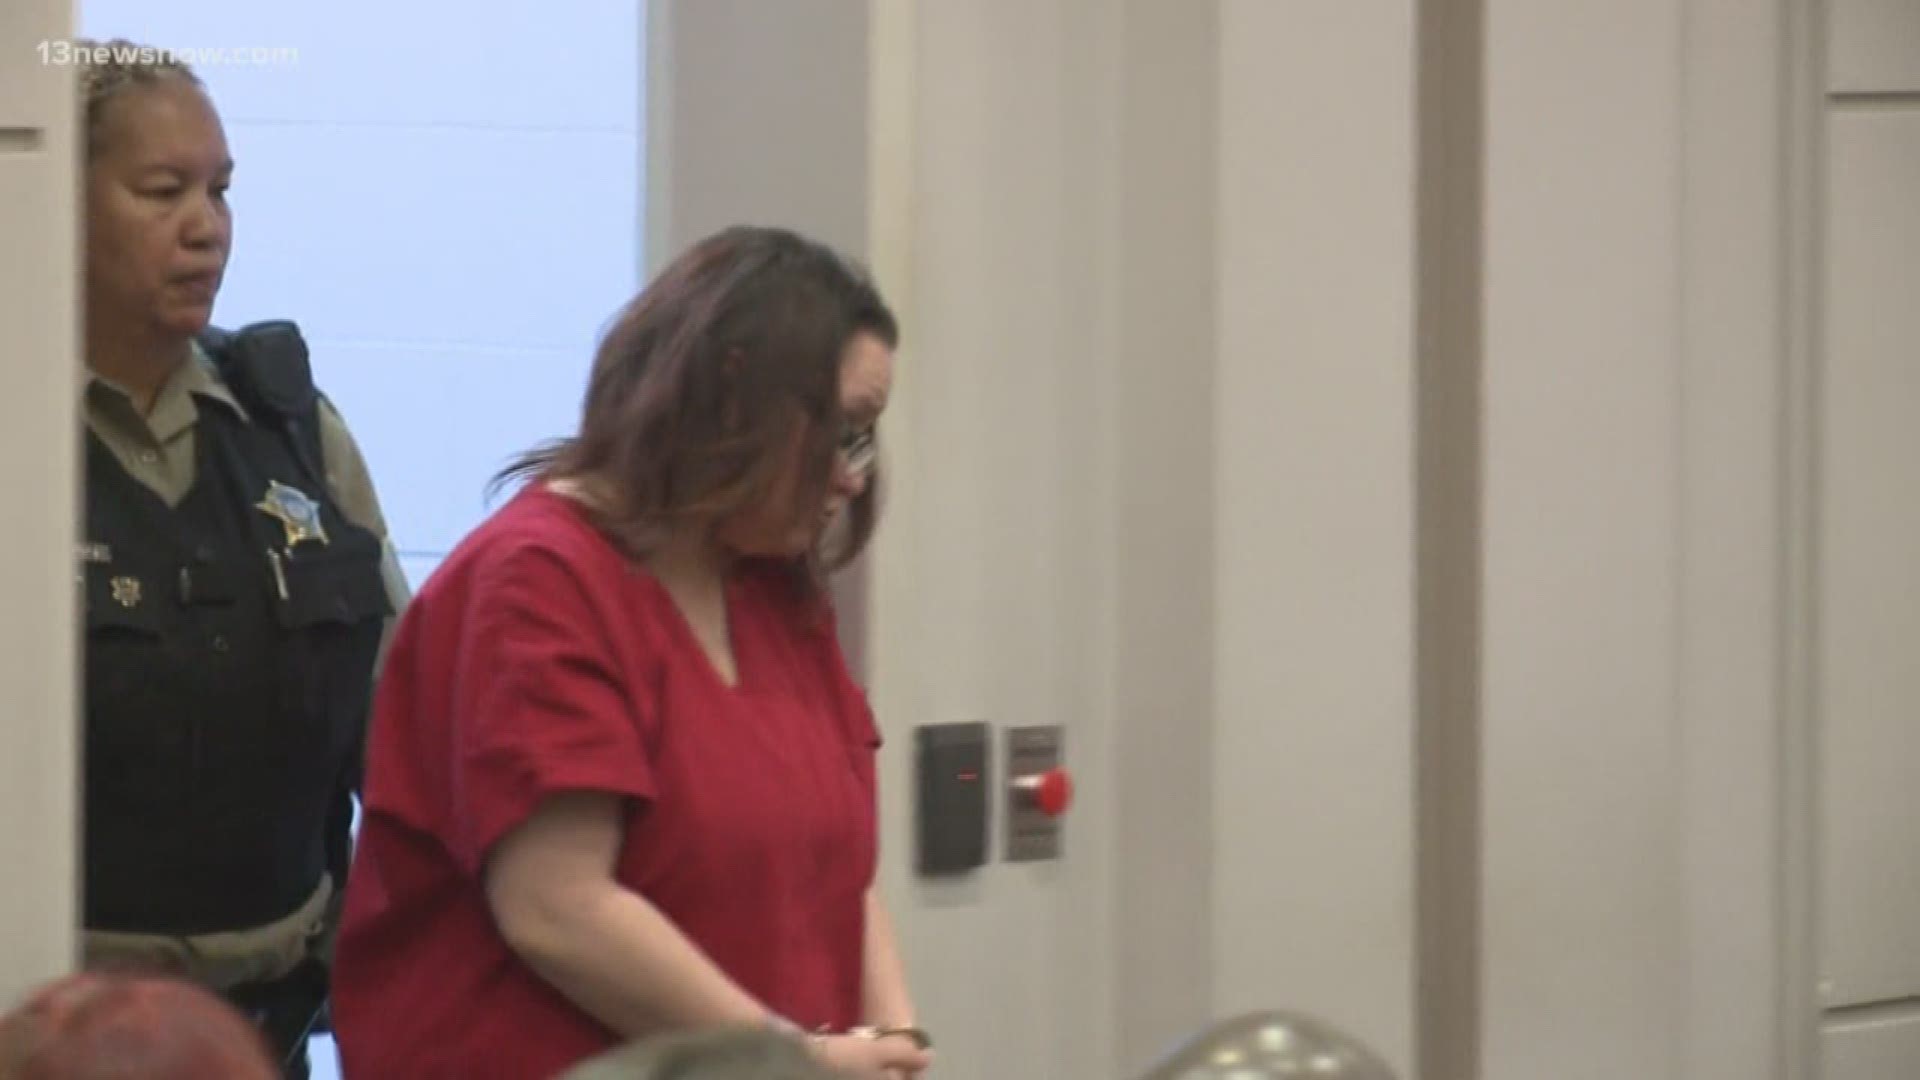 Julia Tomlin appeared in court on November 4, 2019 for arraignment. She's accused of murdering her 2-year-old son, Noah.